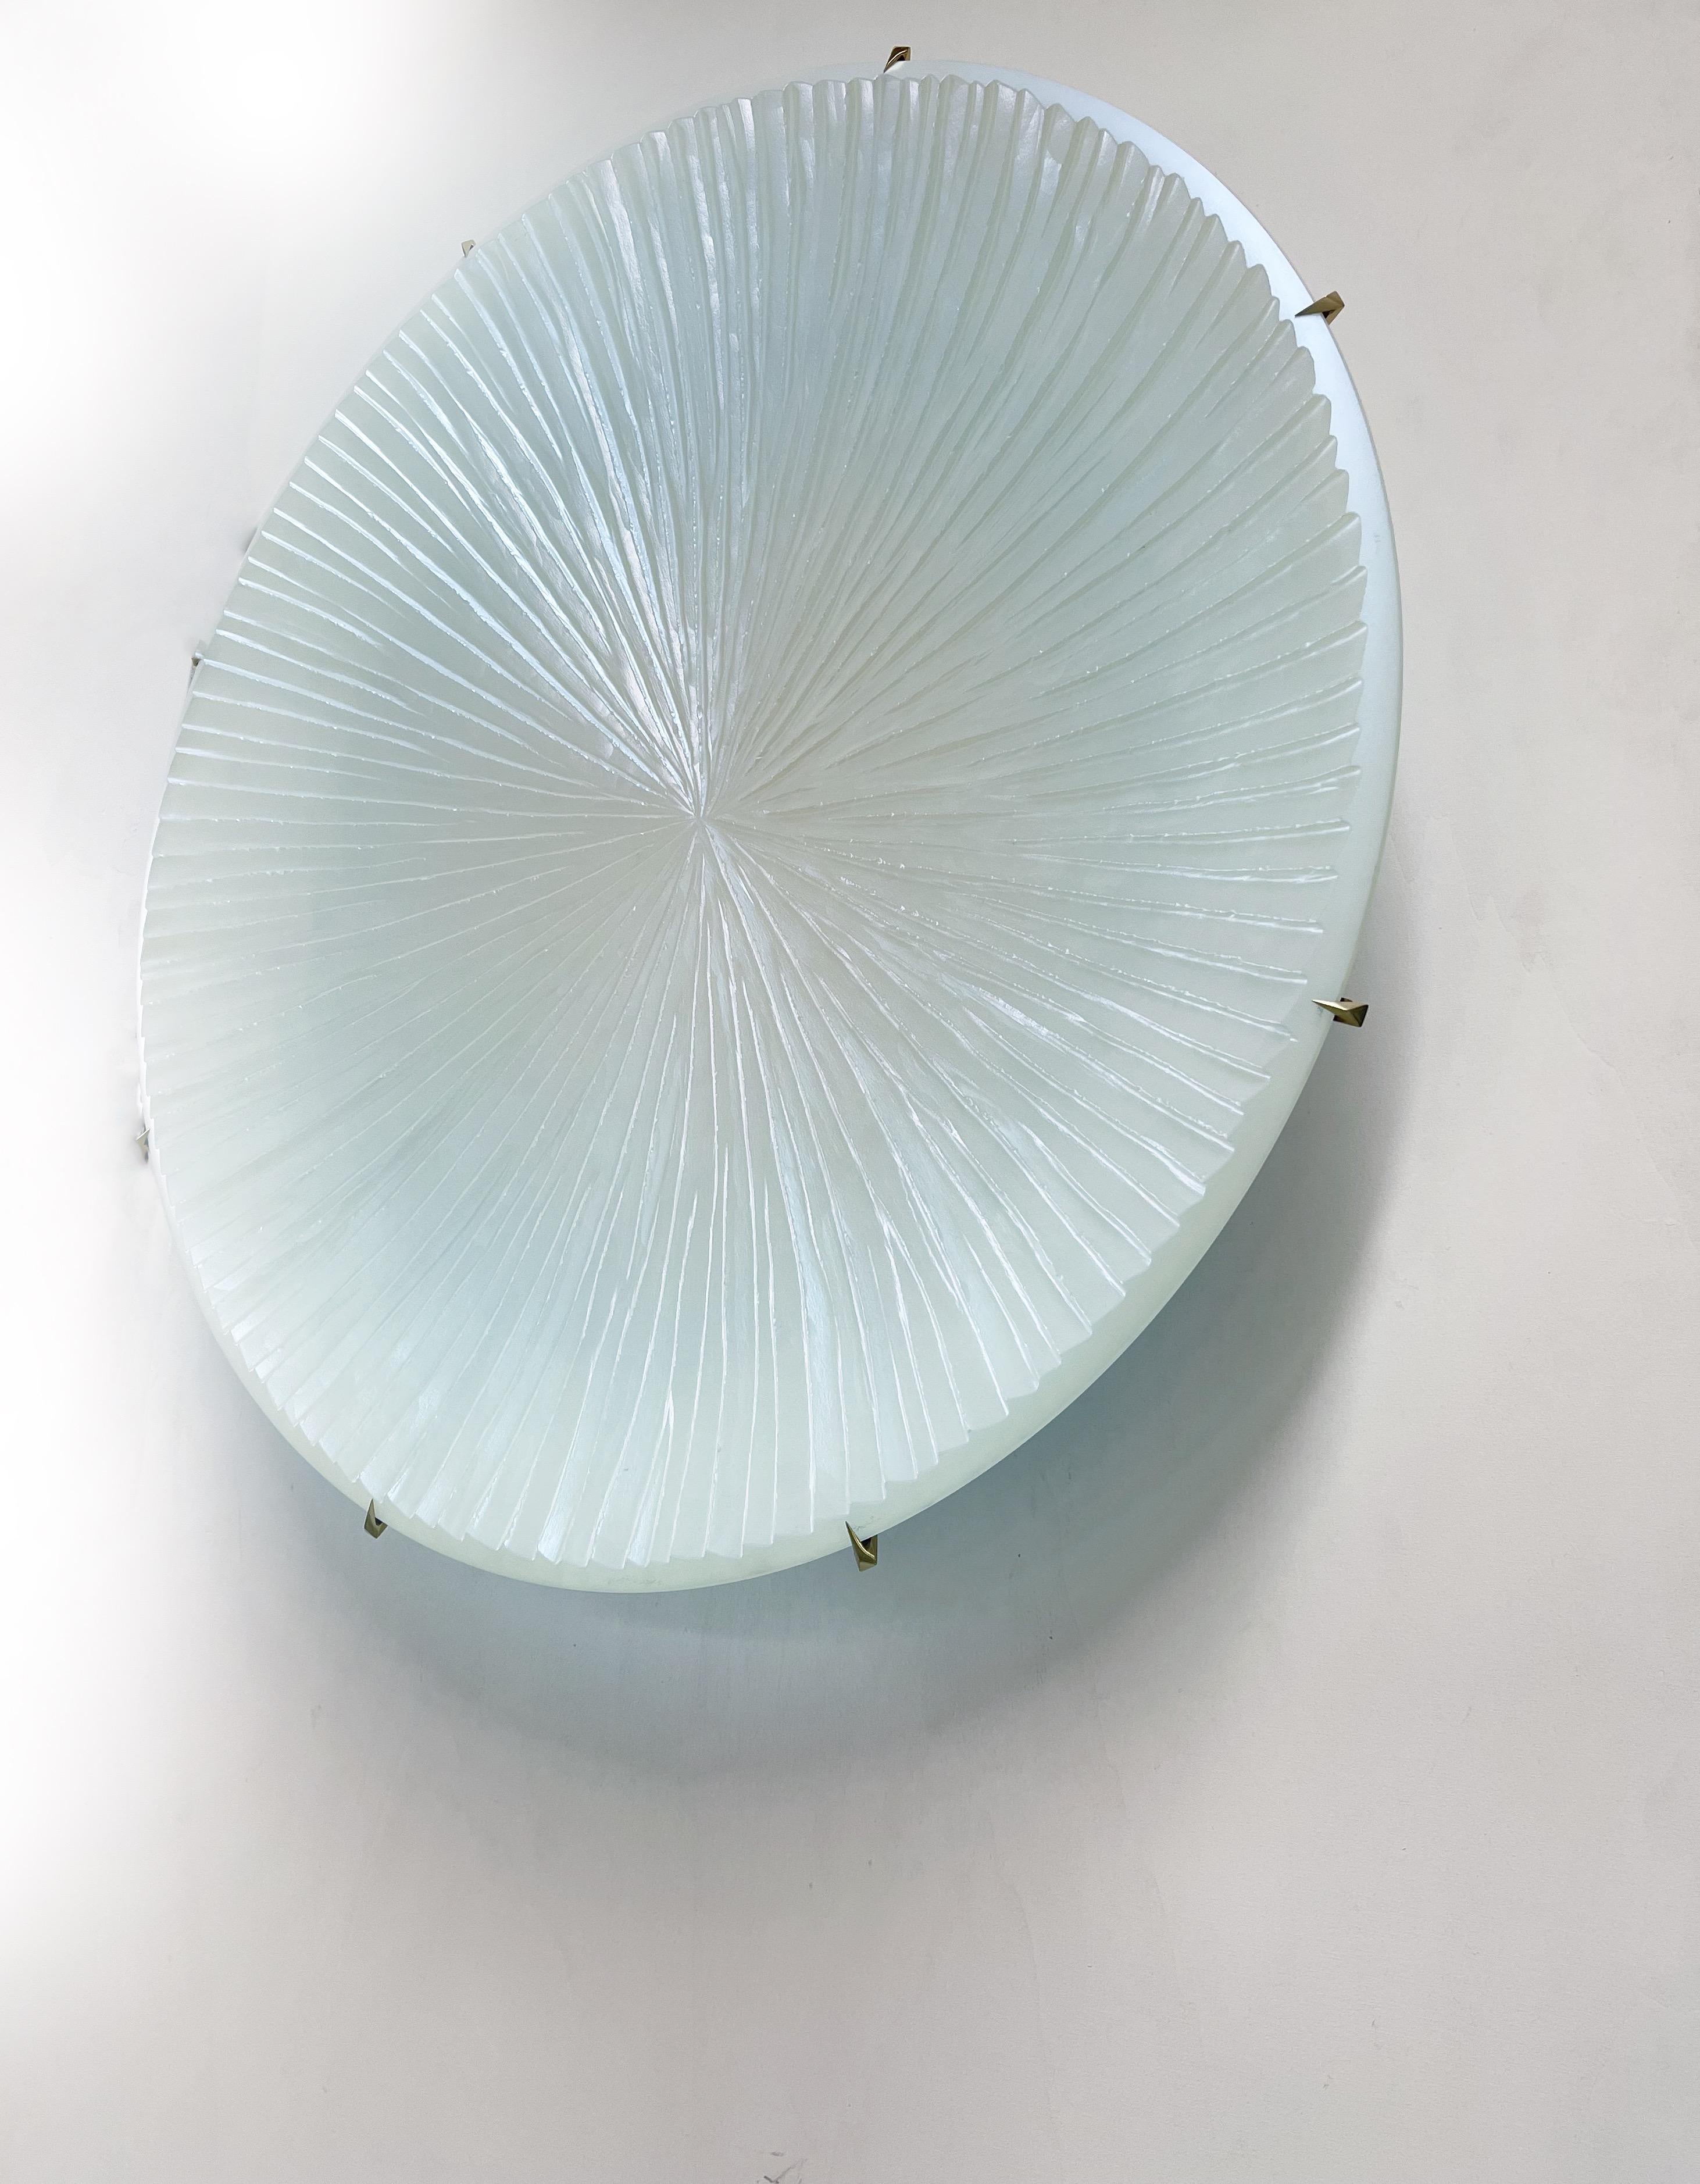 Italian Contemporary Pearly White Concave Wall Plate by Ghiró Studio For Sale